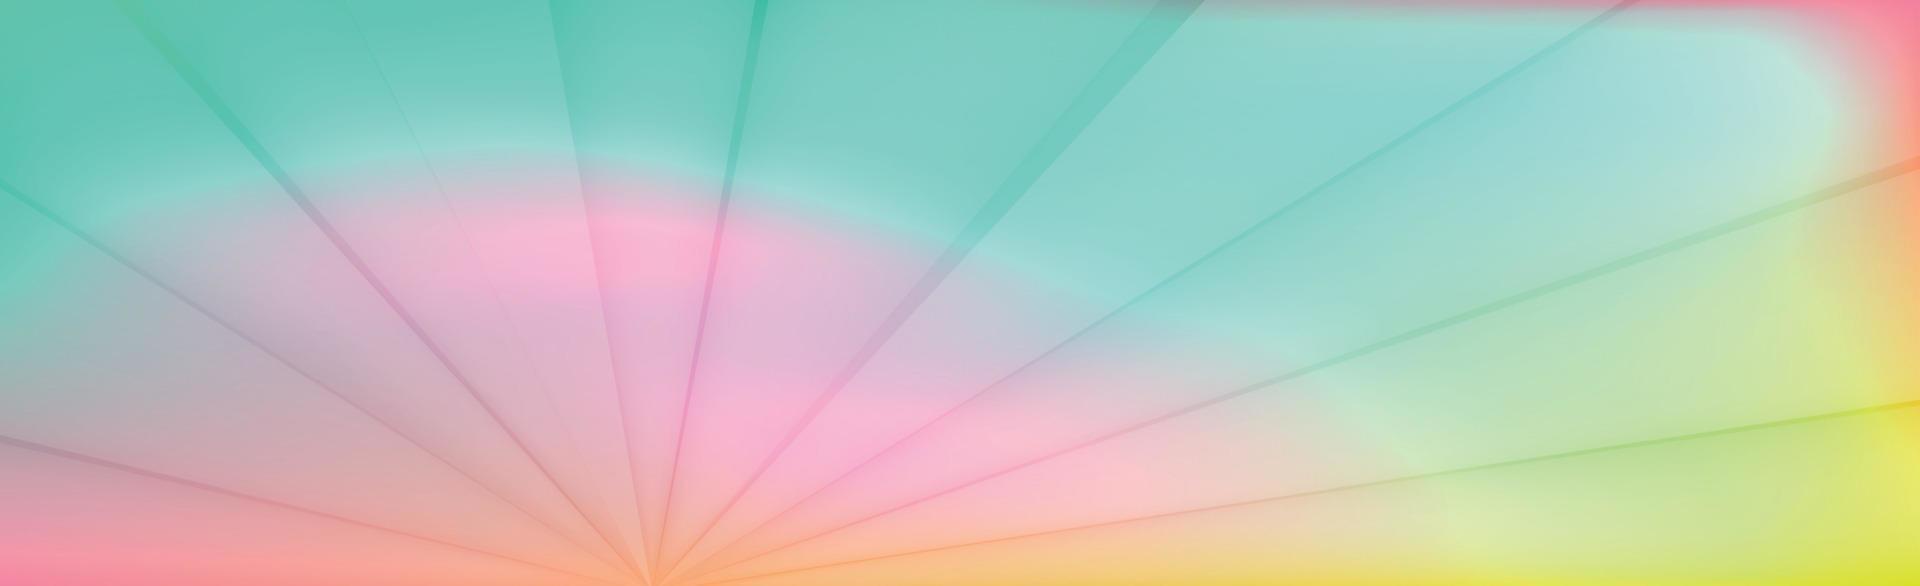 Panoramic abstract web background light multicolored gradient - Vector